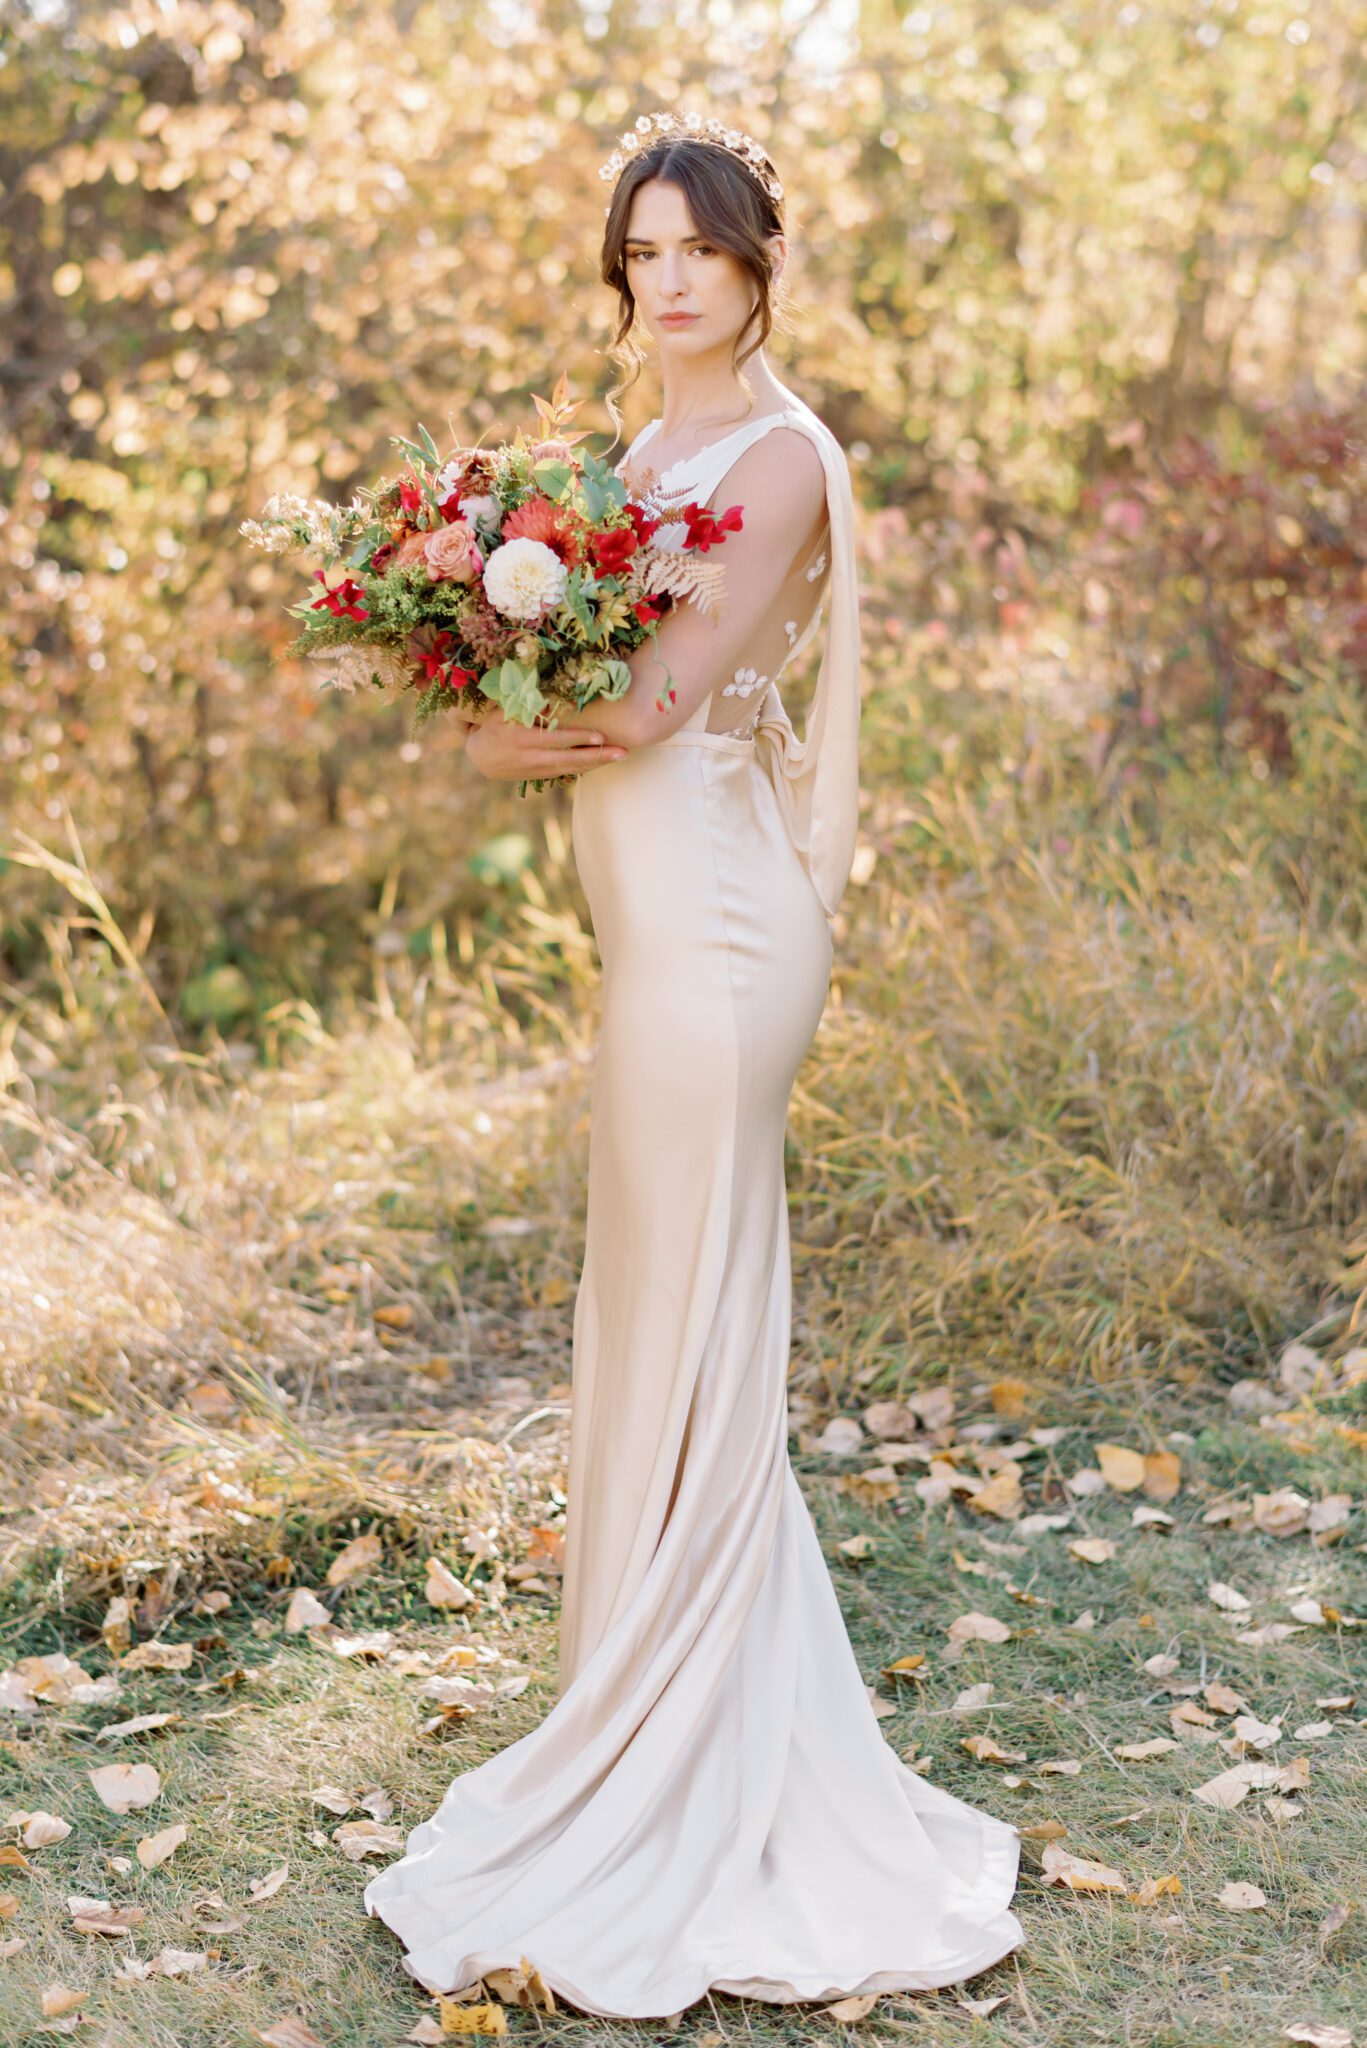 Bride wearing elegant champagne-toned satin wedding gown by Samantha Victoria, holding organic fall floral arrangements by Petal and Stem.